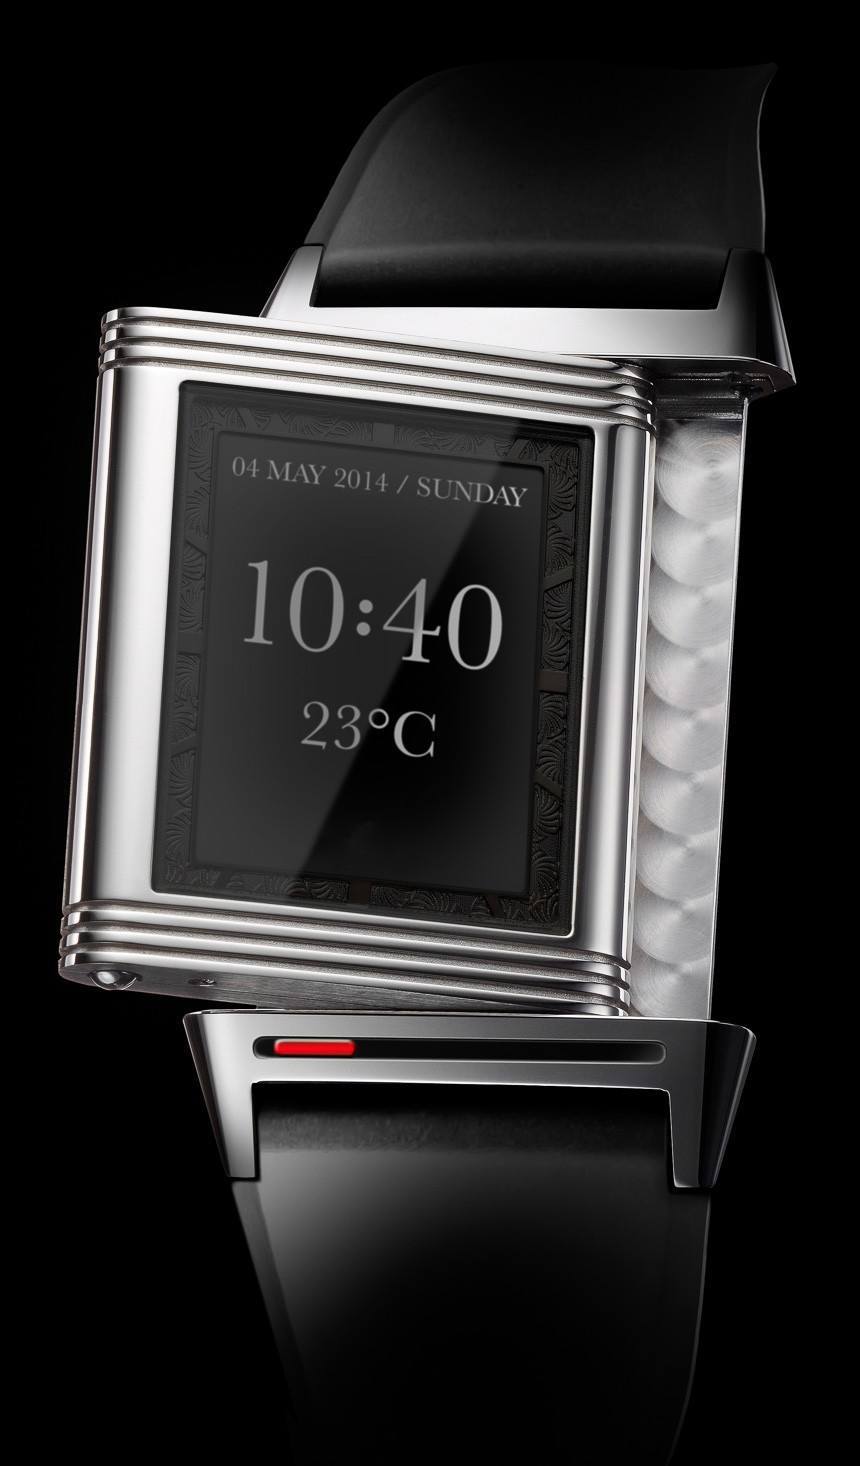 3 Concept Smartwatches That Could Be From Popular Swiss Luxury Brands Watch What-If 